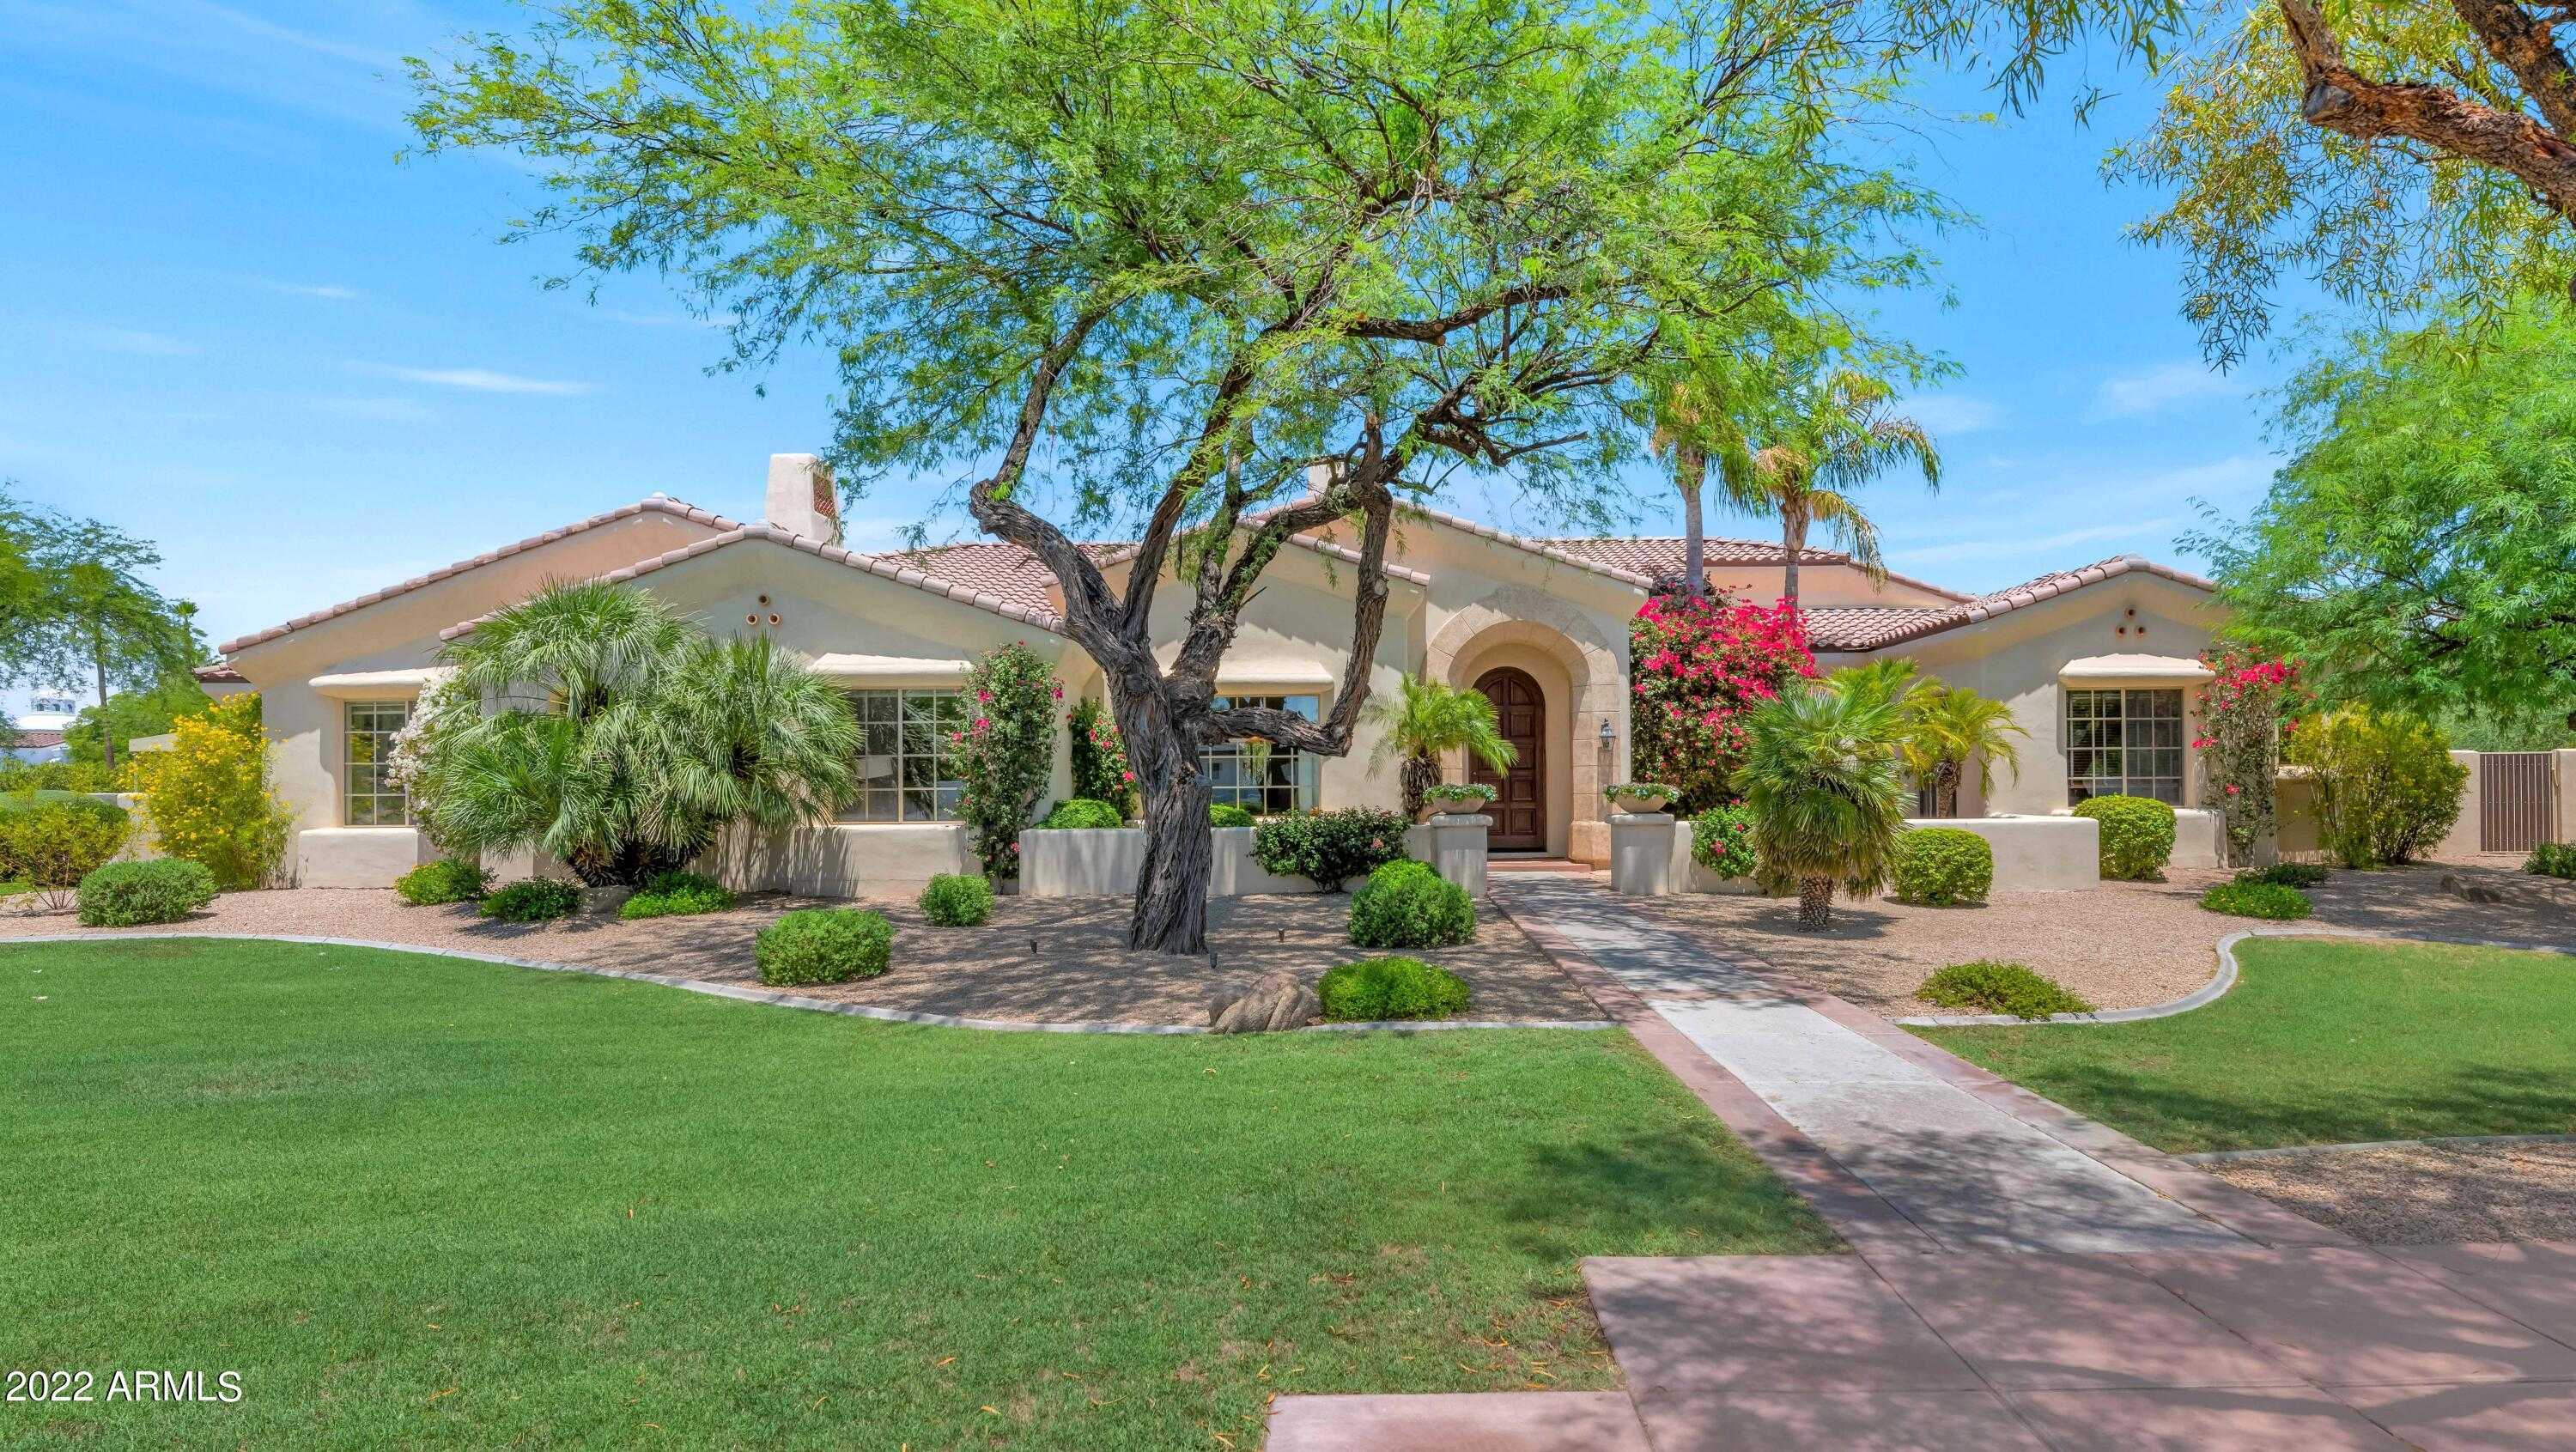 $4,200,000 - 5Br/6Ba - Home for Sale in Views At Cheney, Paradise Valley